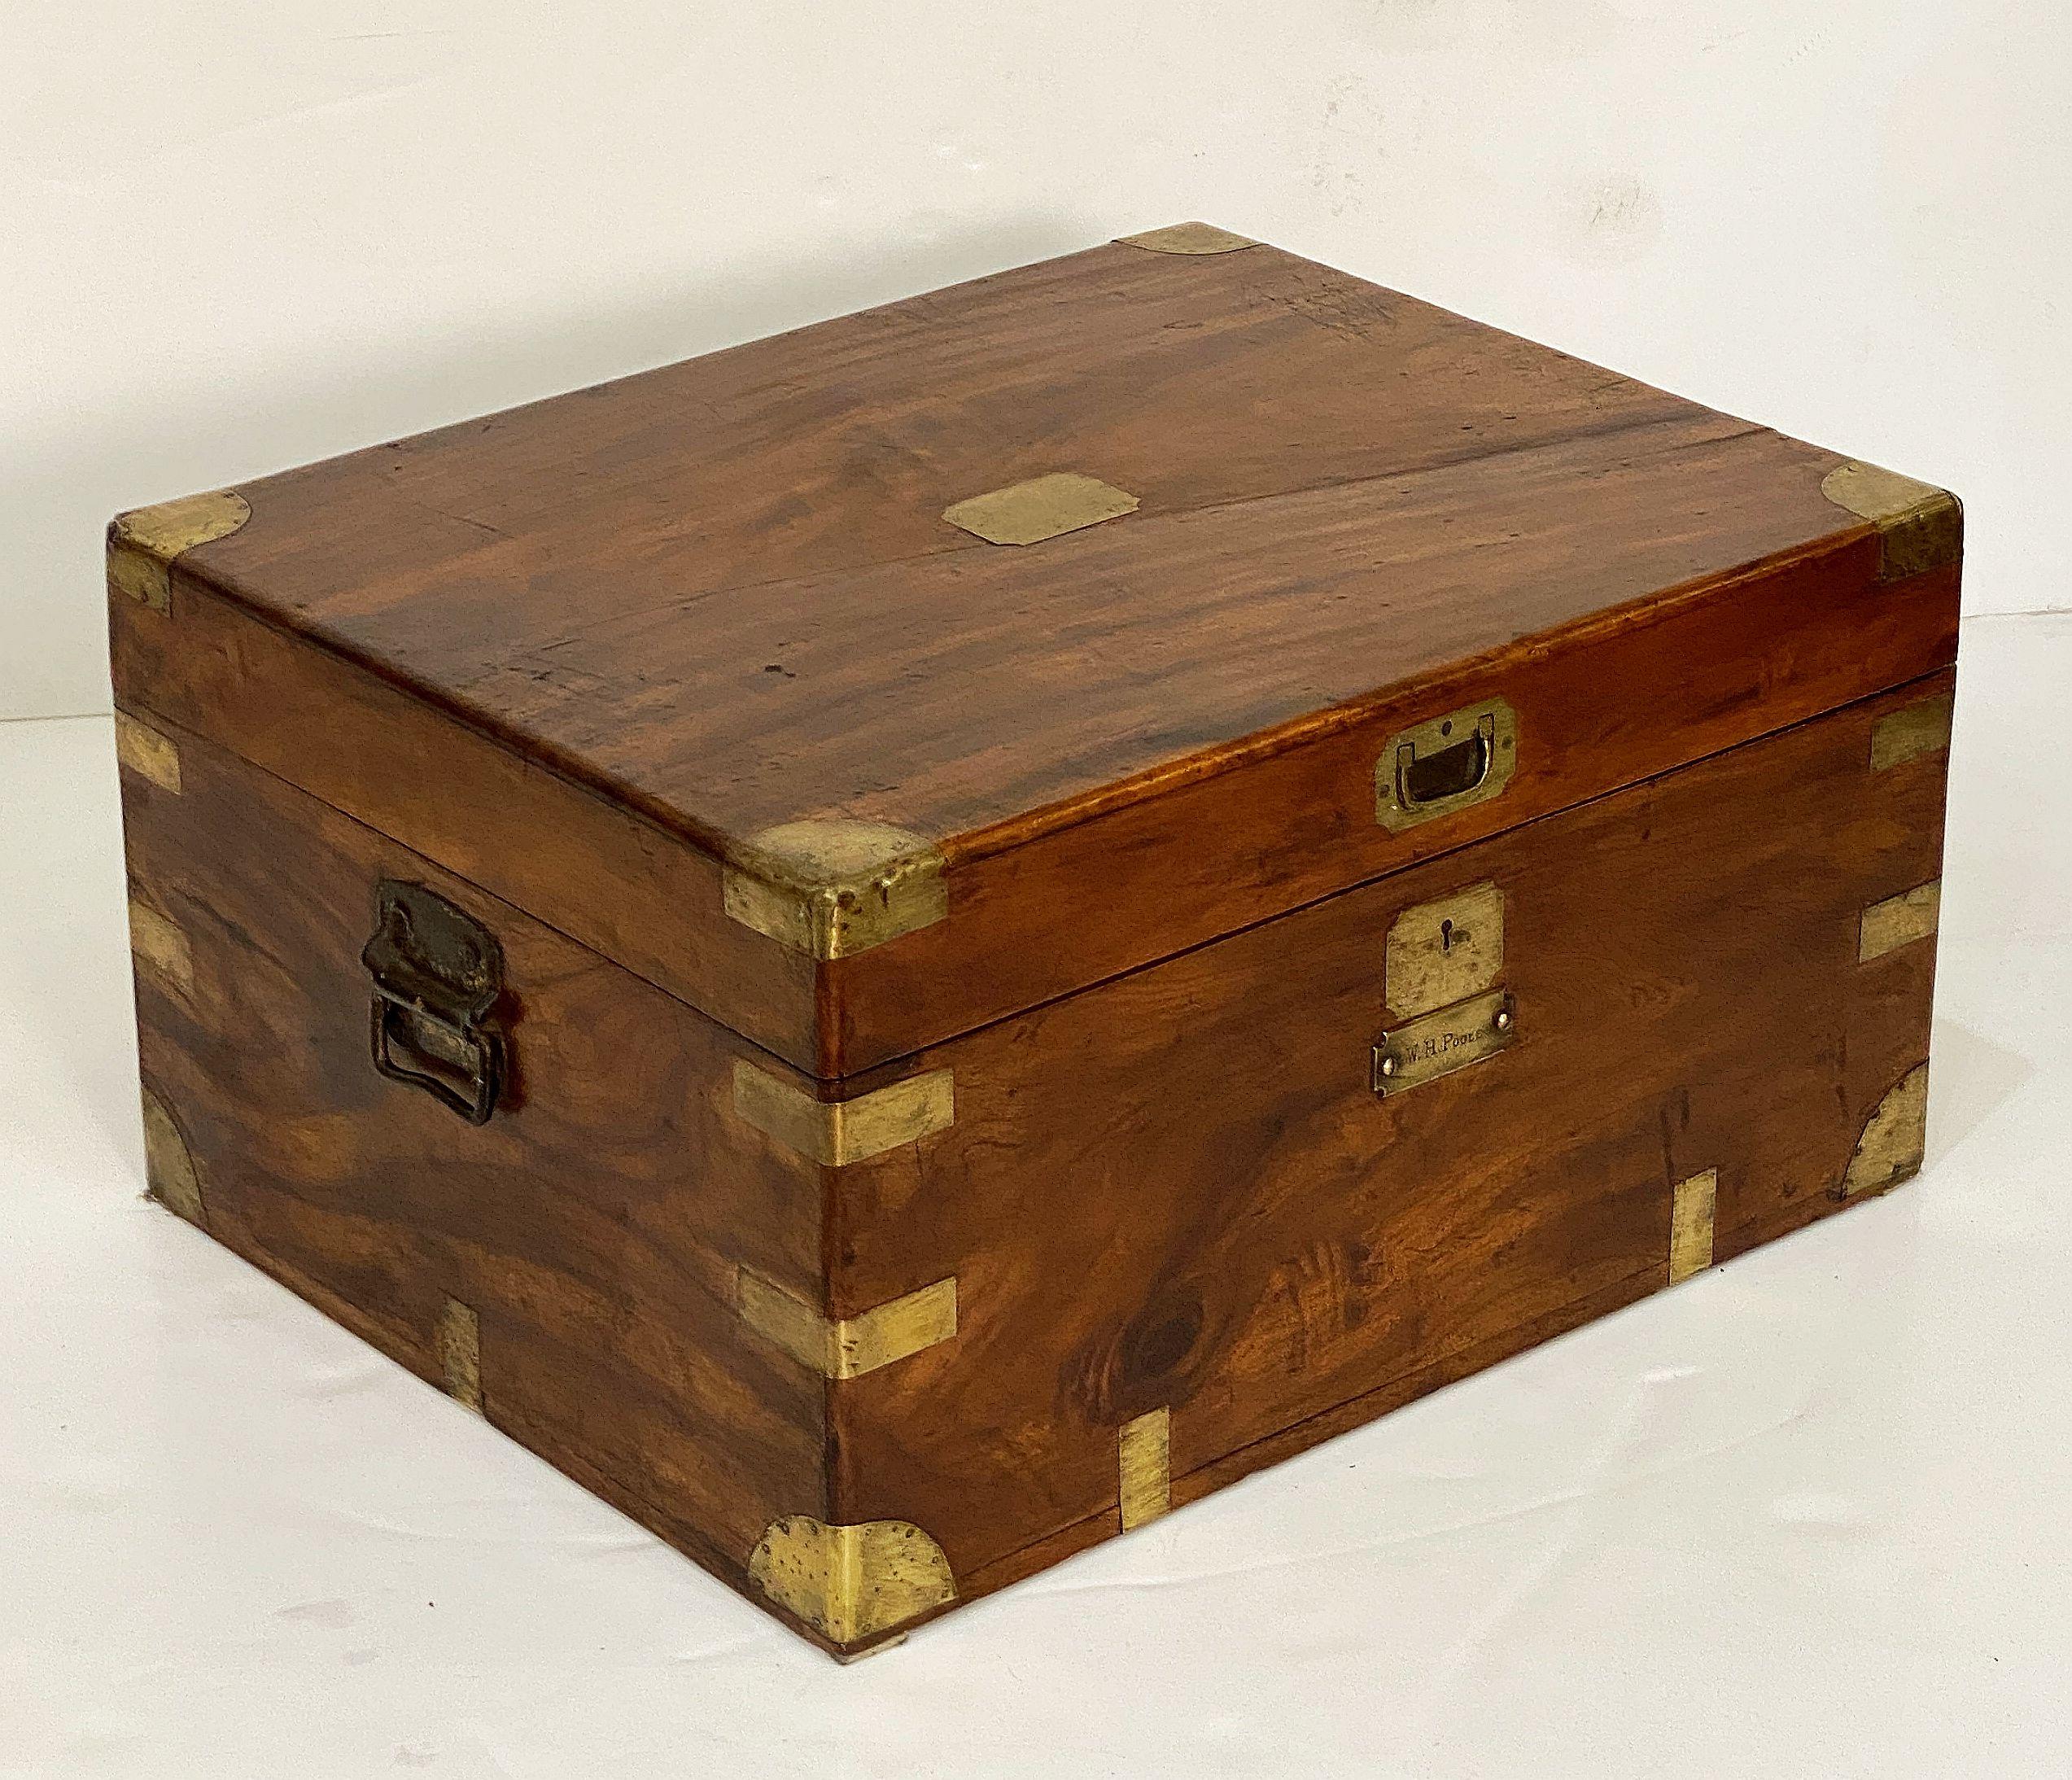 British Military Officer's Campaign Trunk of Brass-Bound Camphor 2